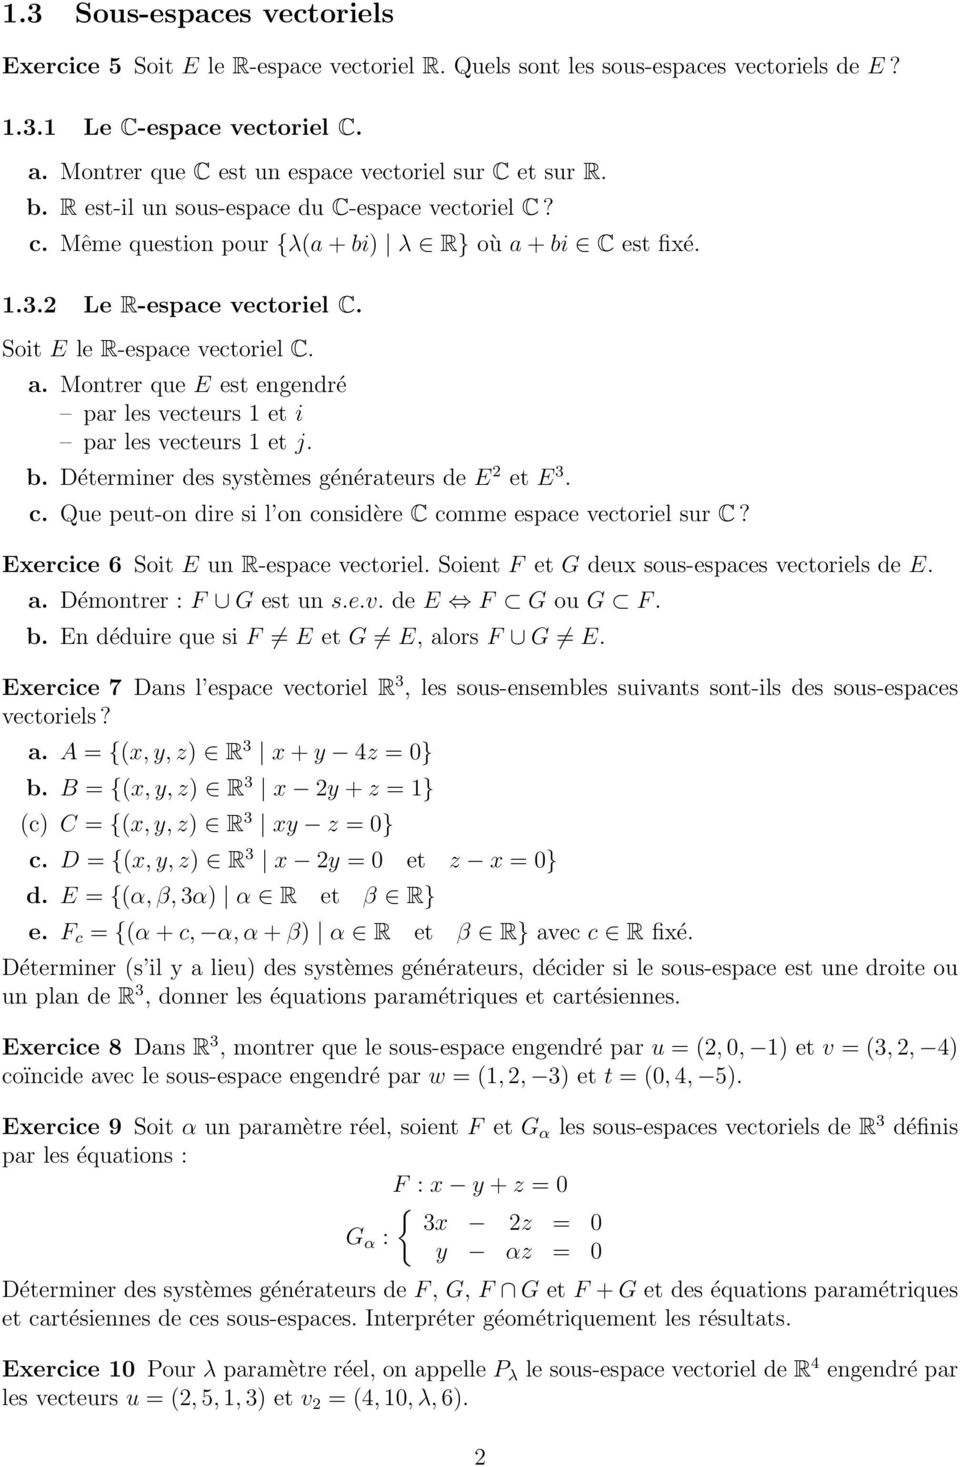 70 Exercices D Algebre Lineaire Pdf Free Download